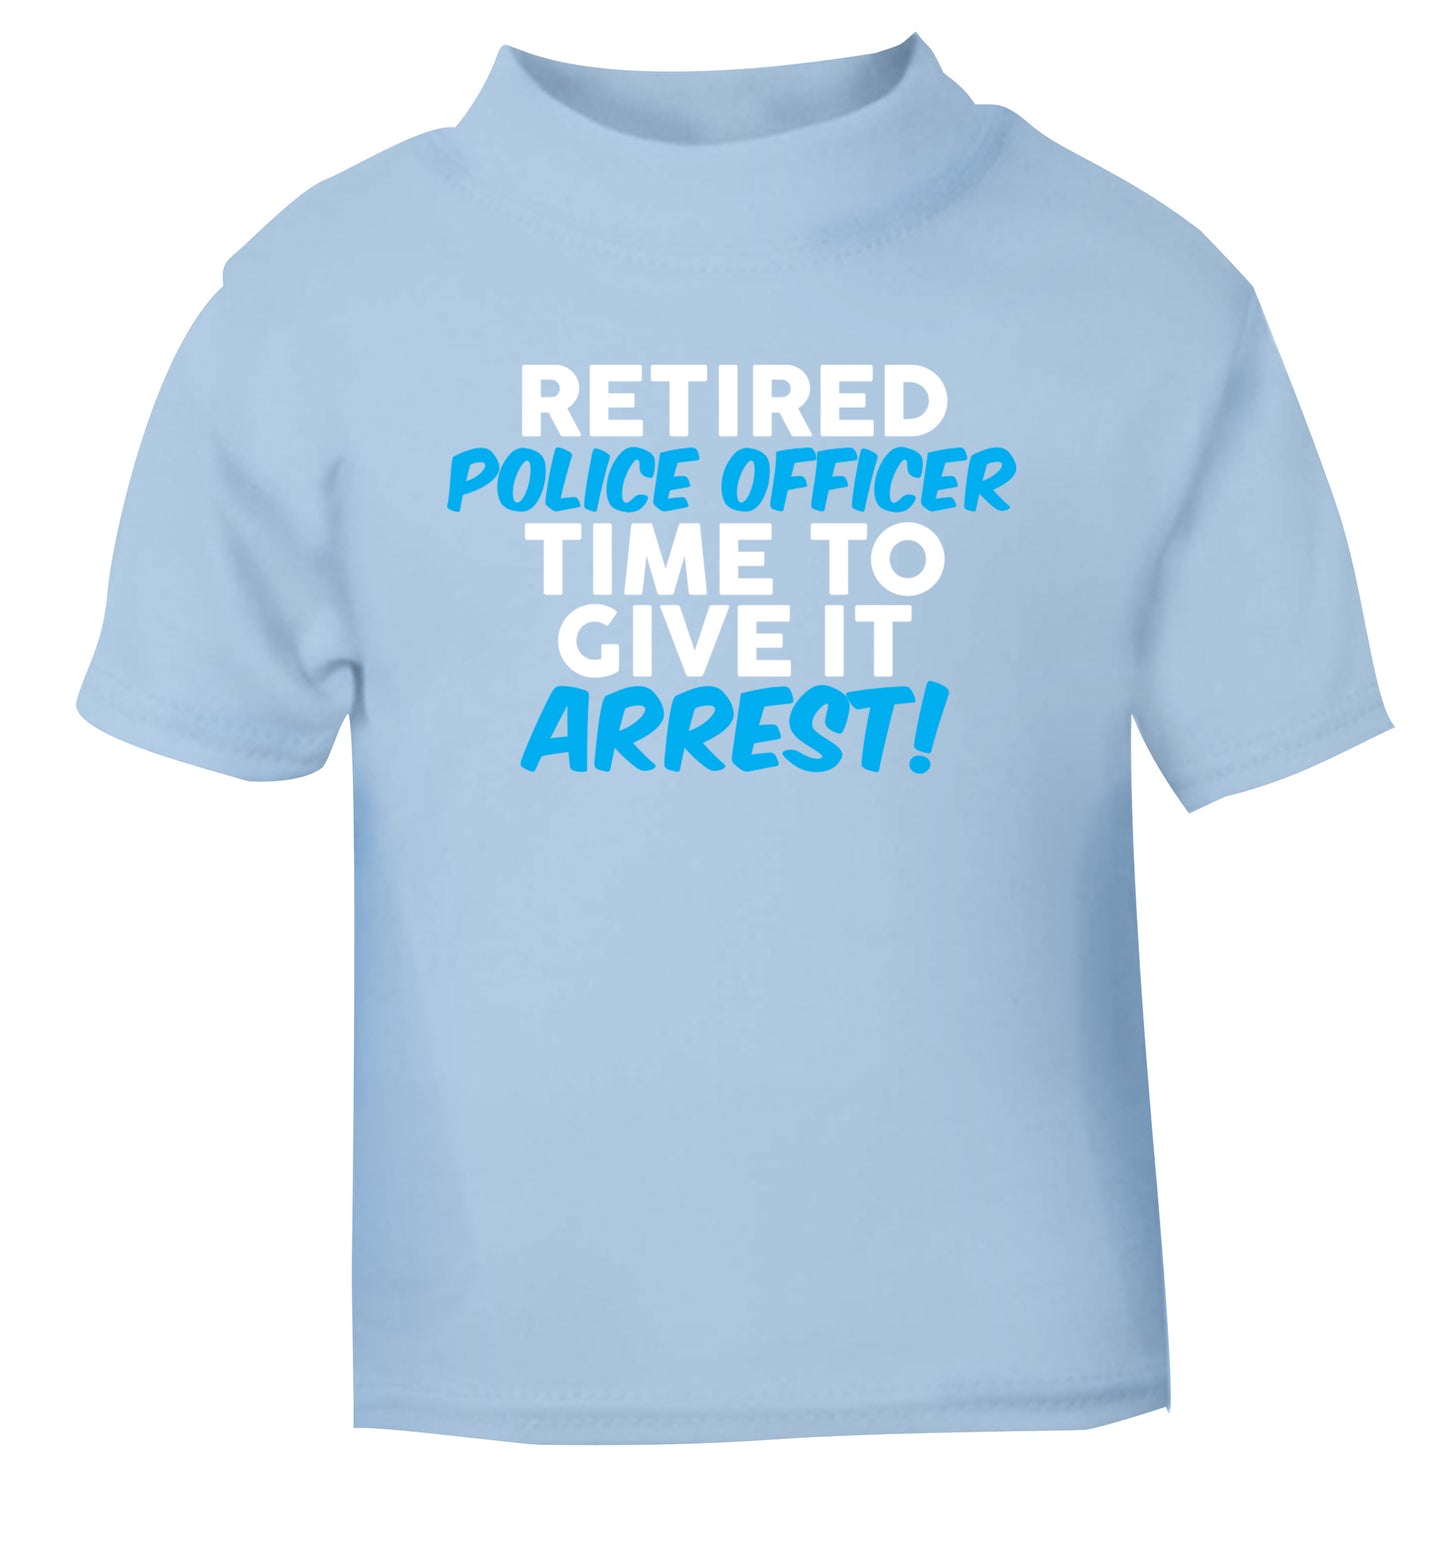 Retired police officer time to give it arrest light blue Baby Toddler Tshirt 2 Years